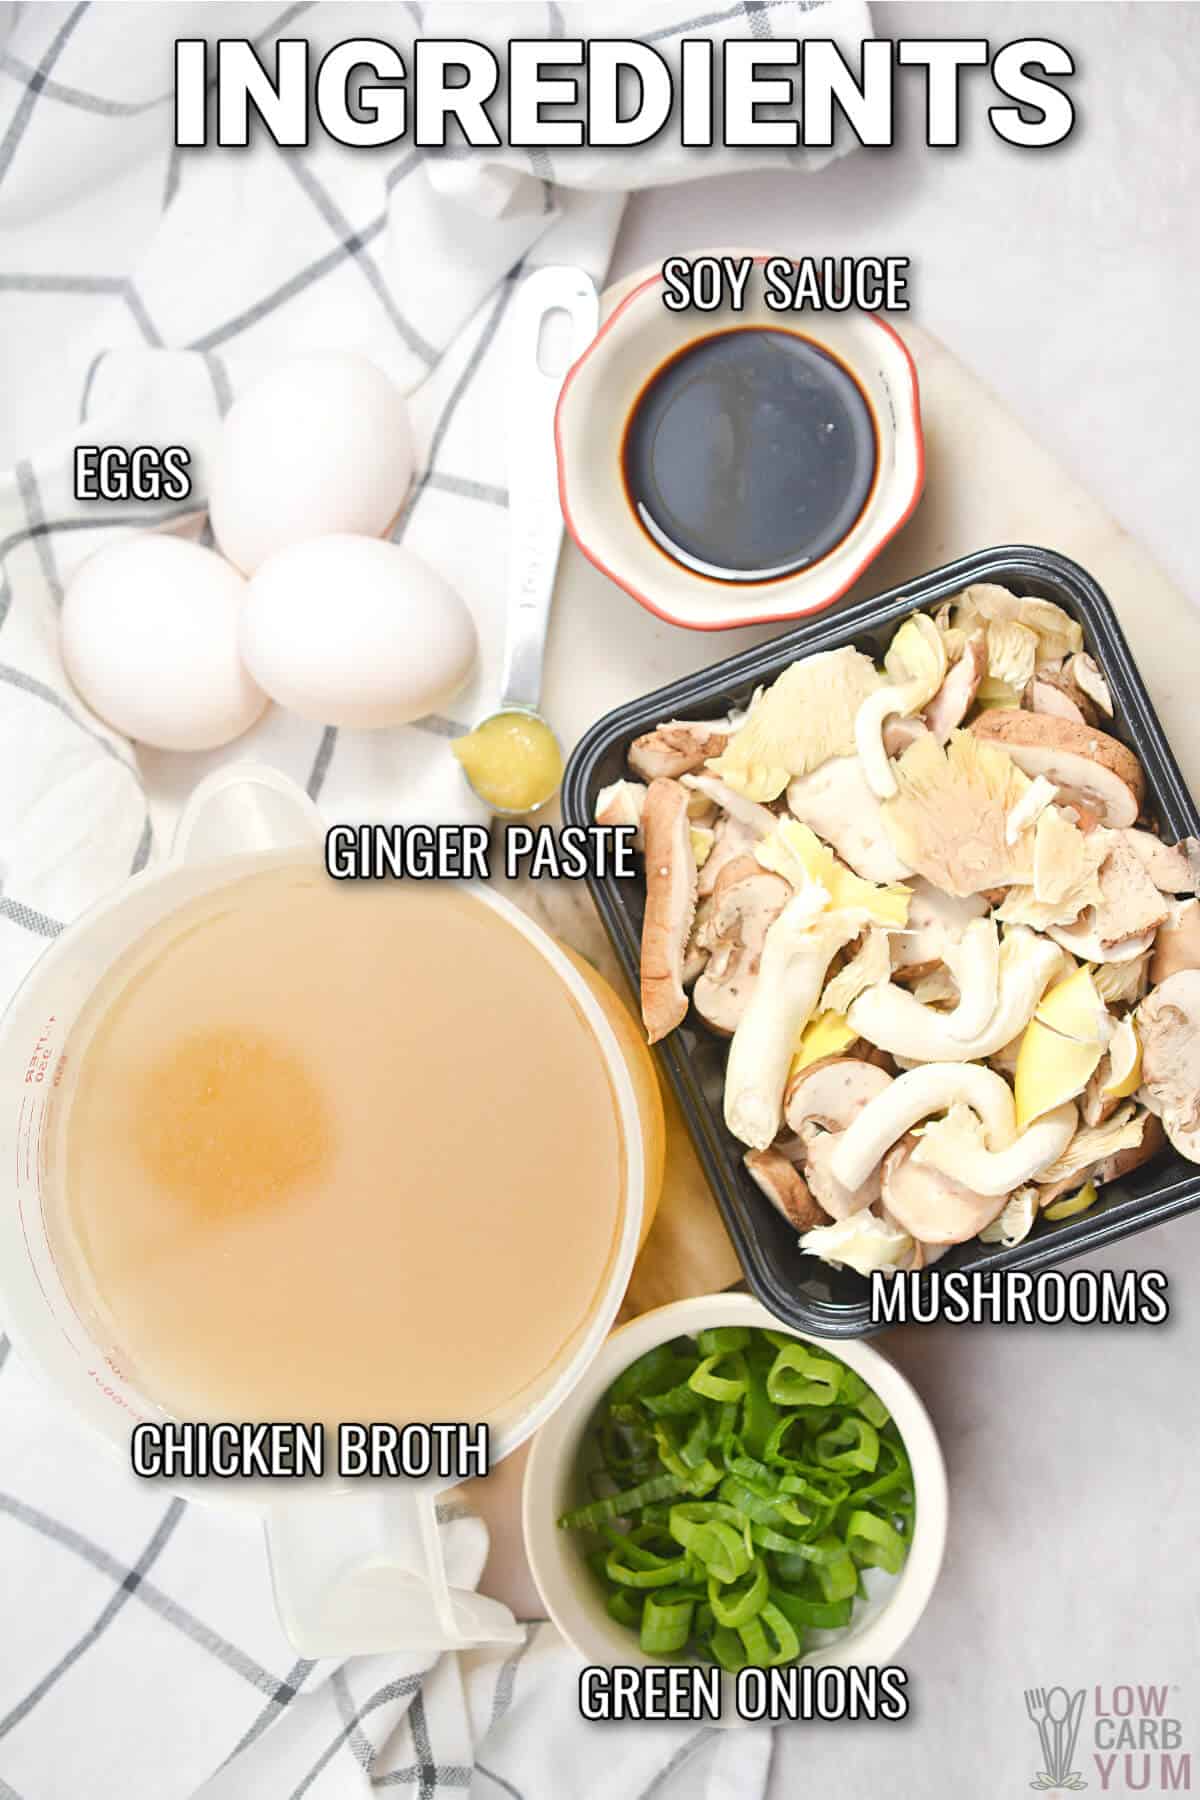 ingredients including eggs, soy sauce, ginger paste, chicken broth, mushrooms and green onions